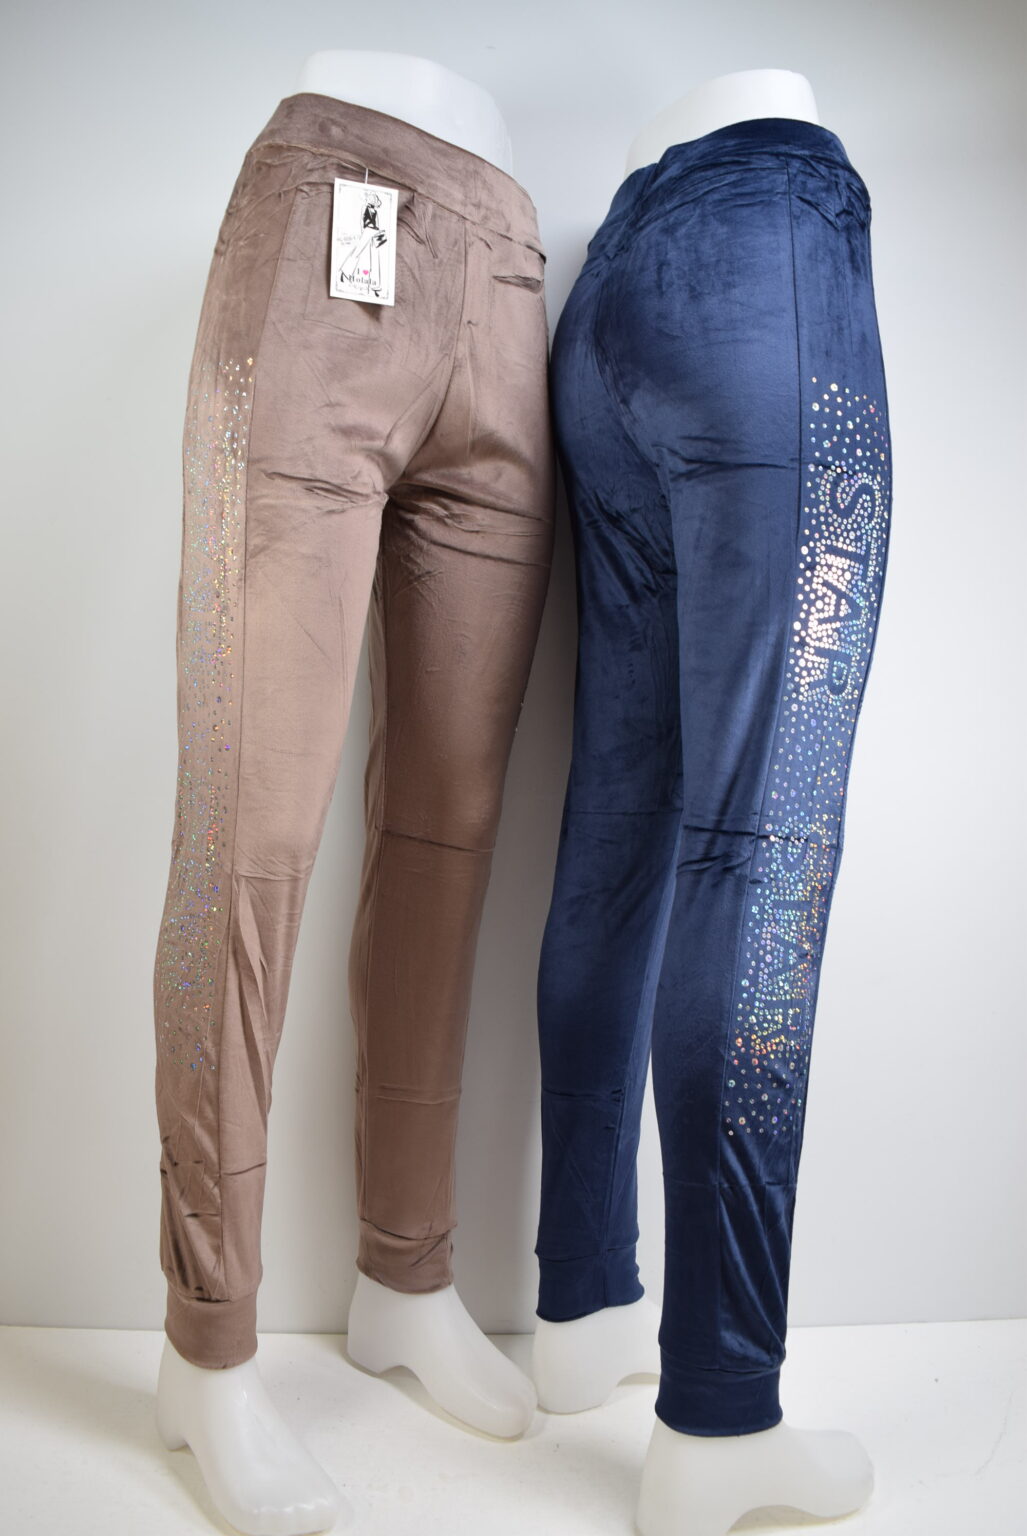 Colorful Velvet Pants with Glittery Star Pattern (x12)